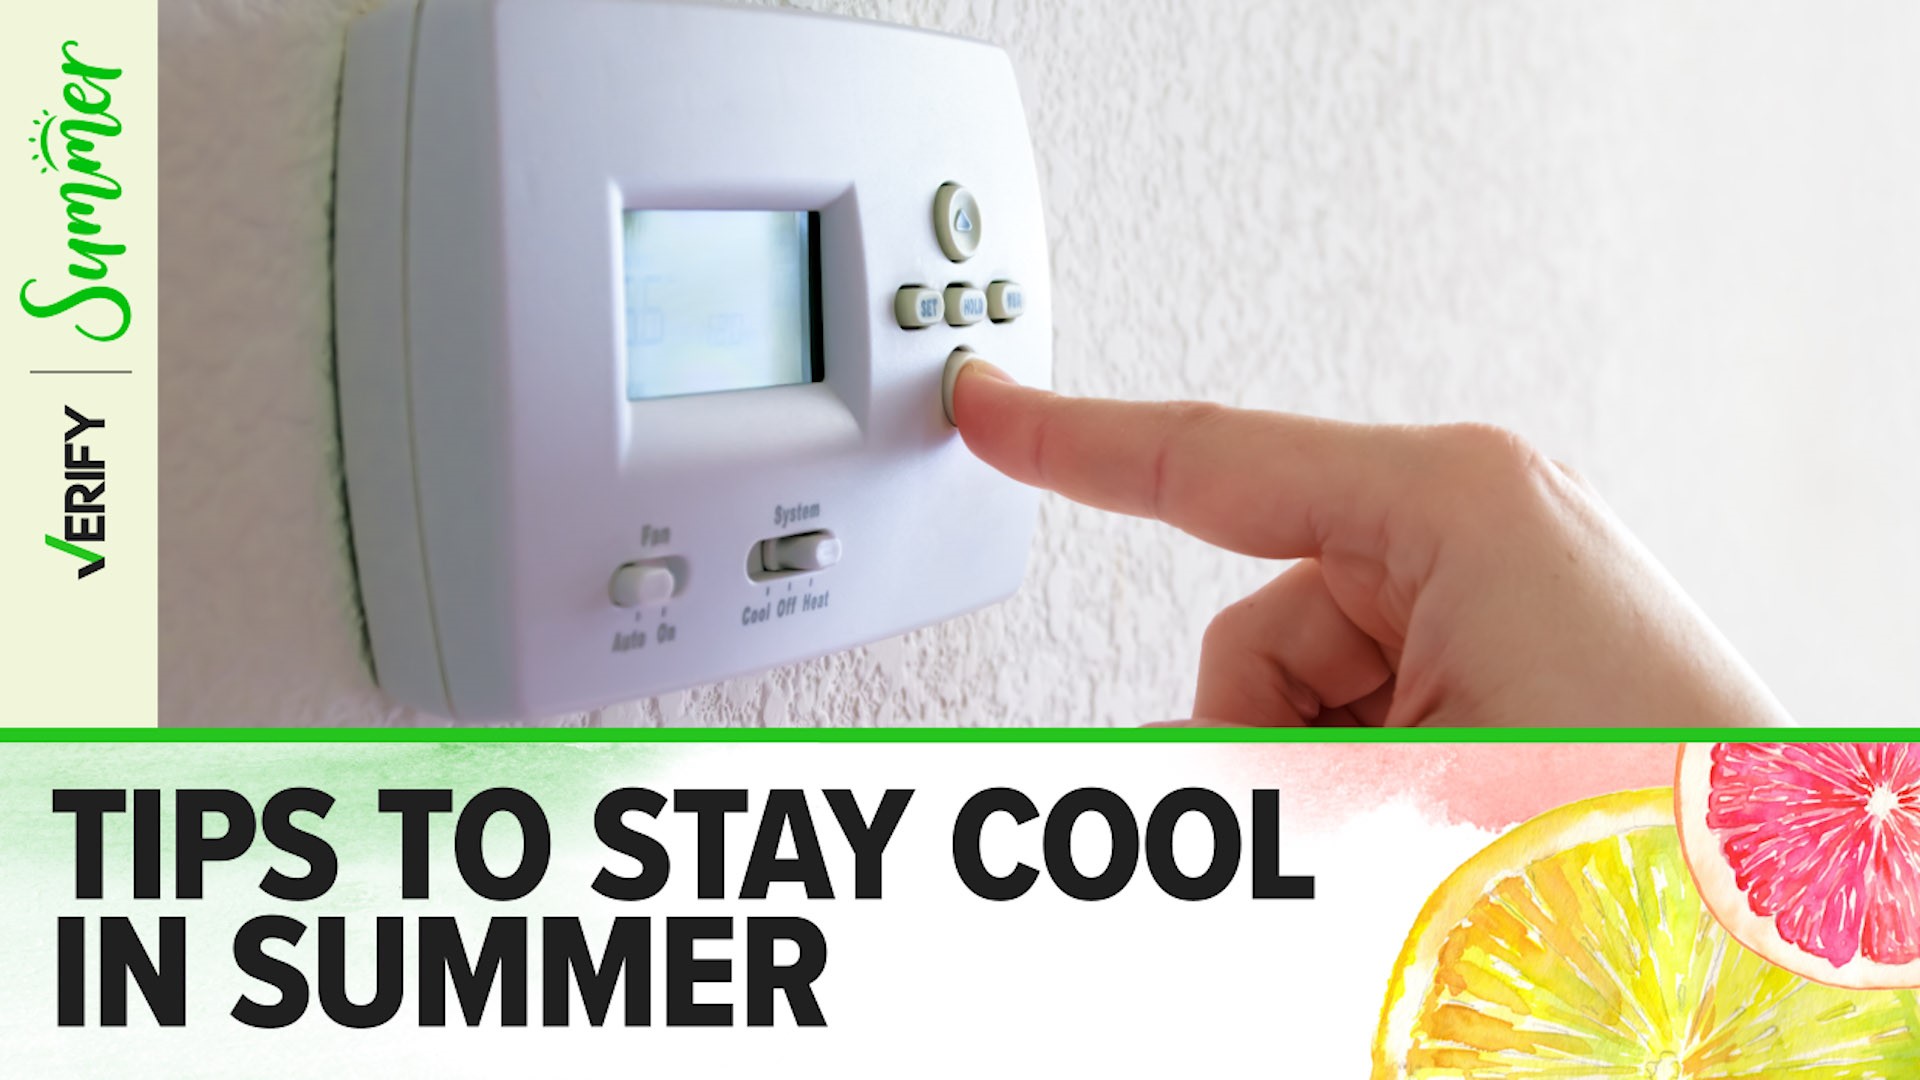 11 ways to keep cool in the summer heat